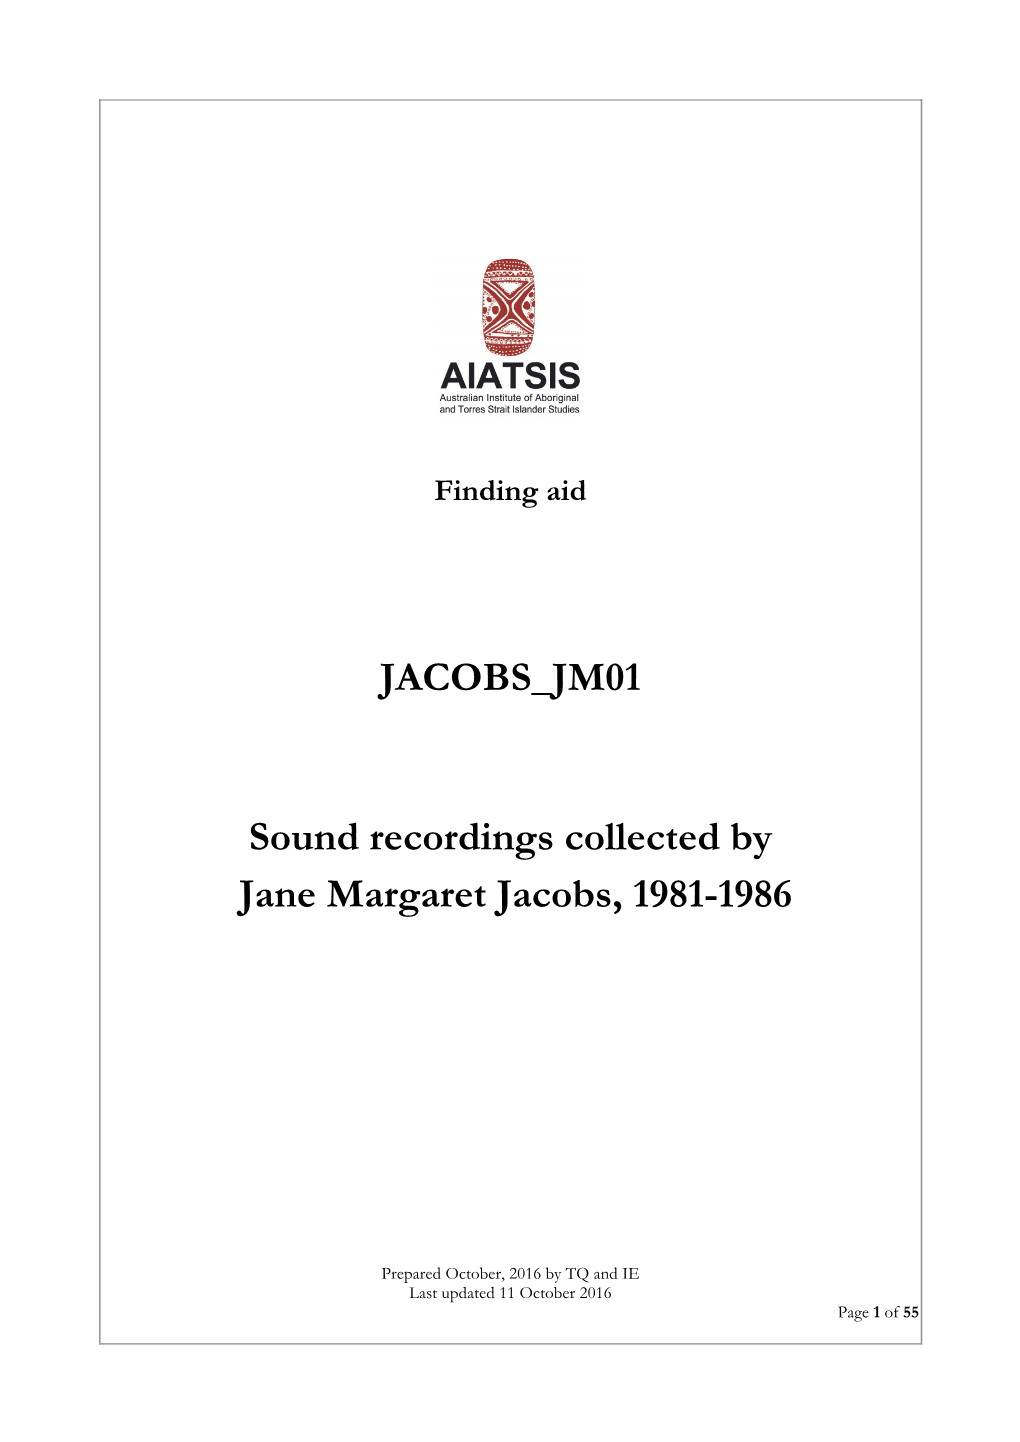 Guide to Sound Recordings Collected by Jane Margaret Jacobs, 1981-1986